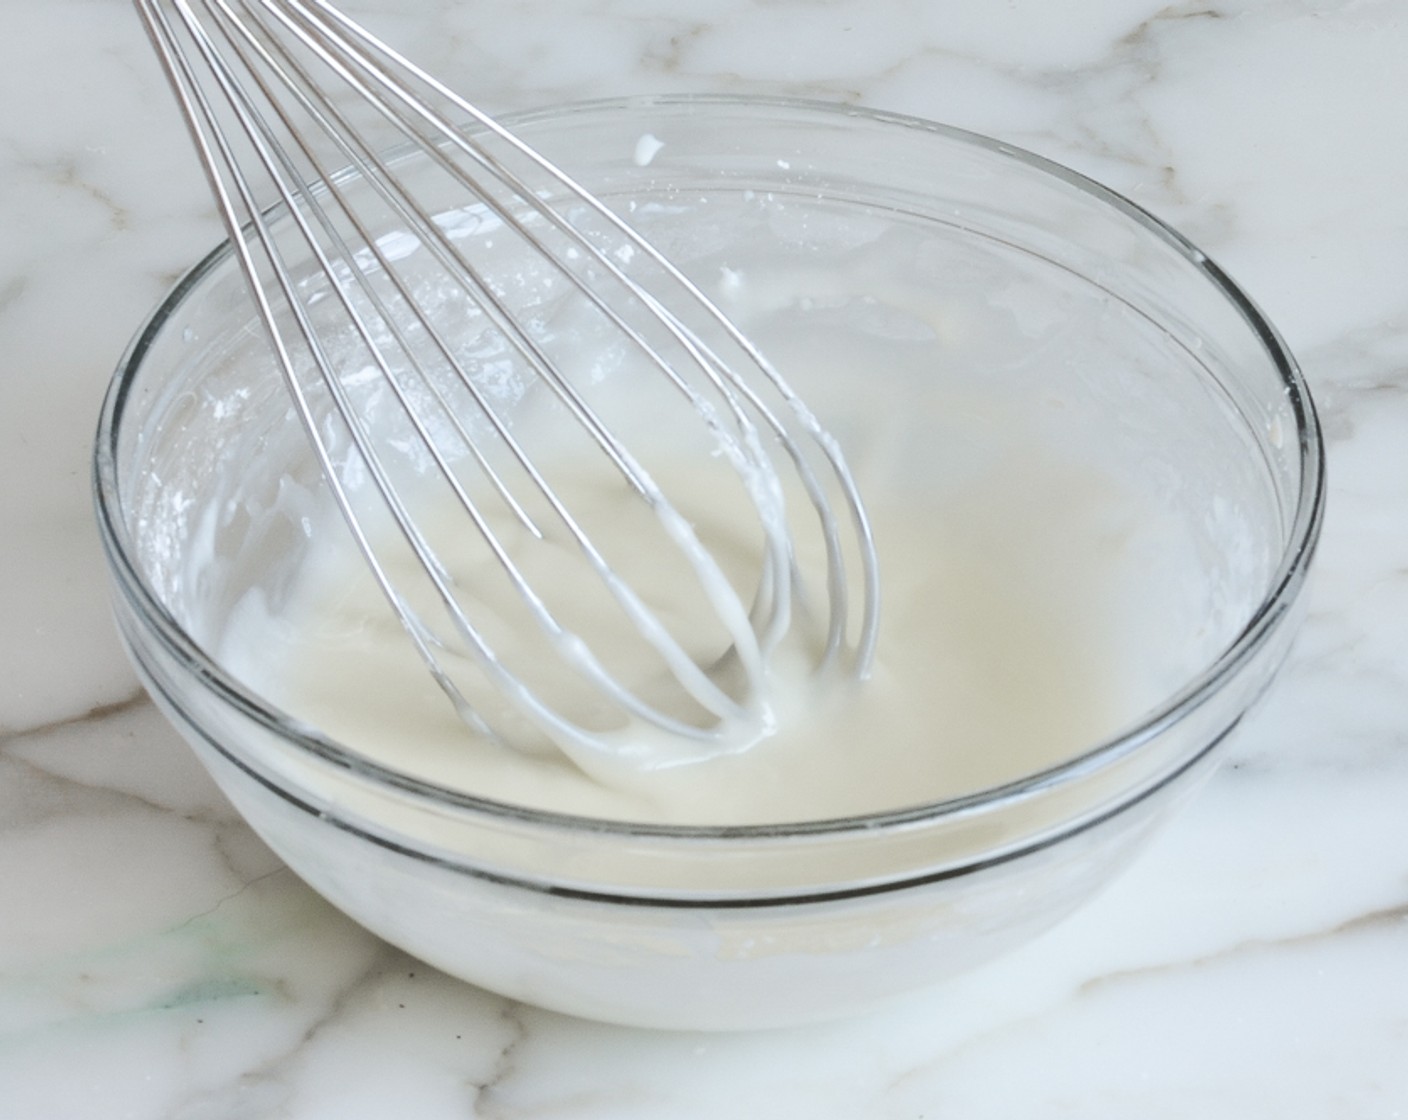 step 13 Meanwhile, make the glaze. In a medium bowl, whisk together the Philadelphia Original Soft Cheese (1 1/2 Tbsp), Buttermilk (2 Tbsp) until thick and smooth. Add Powdered Confectioners Sugar (3/4 cup) and whisk until smooth glaze forms.